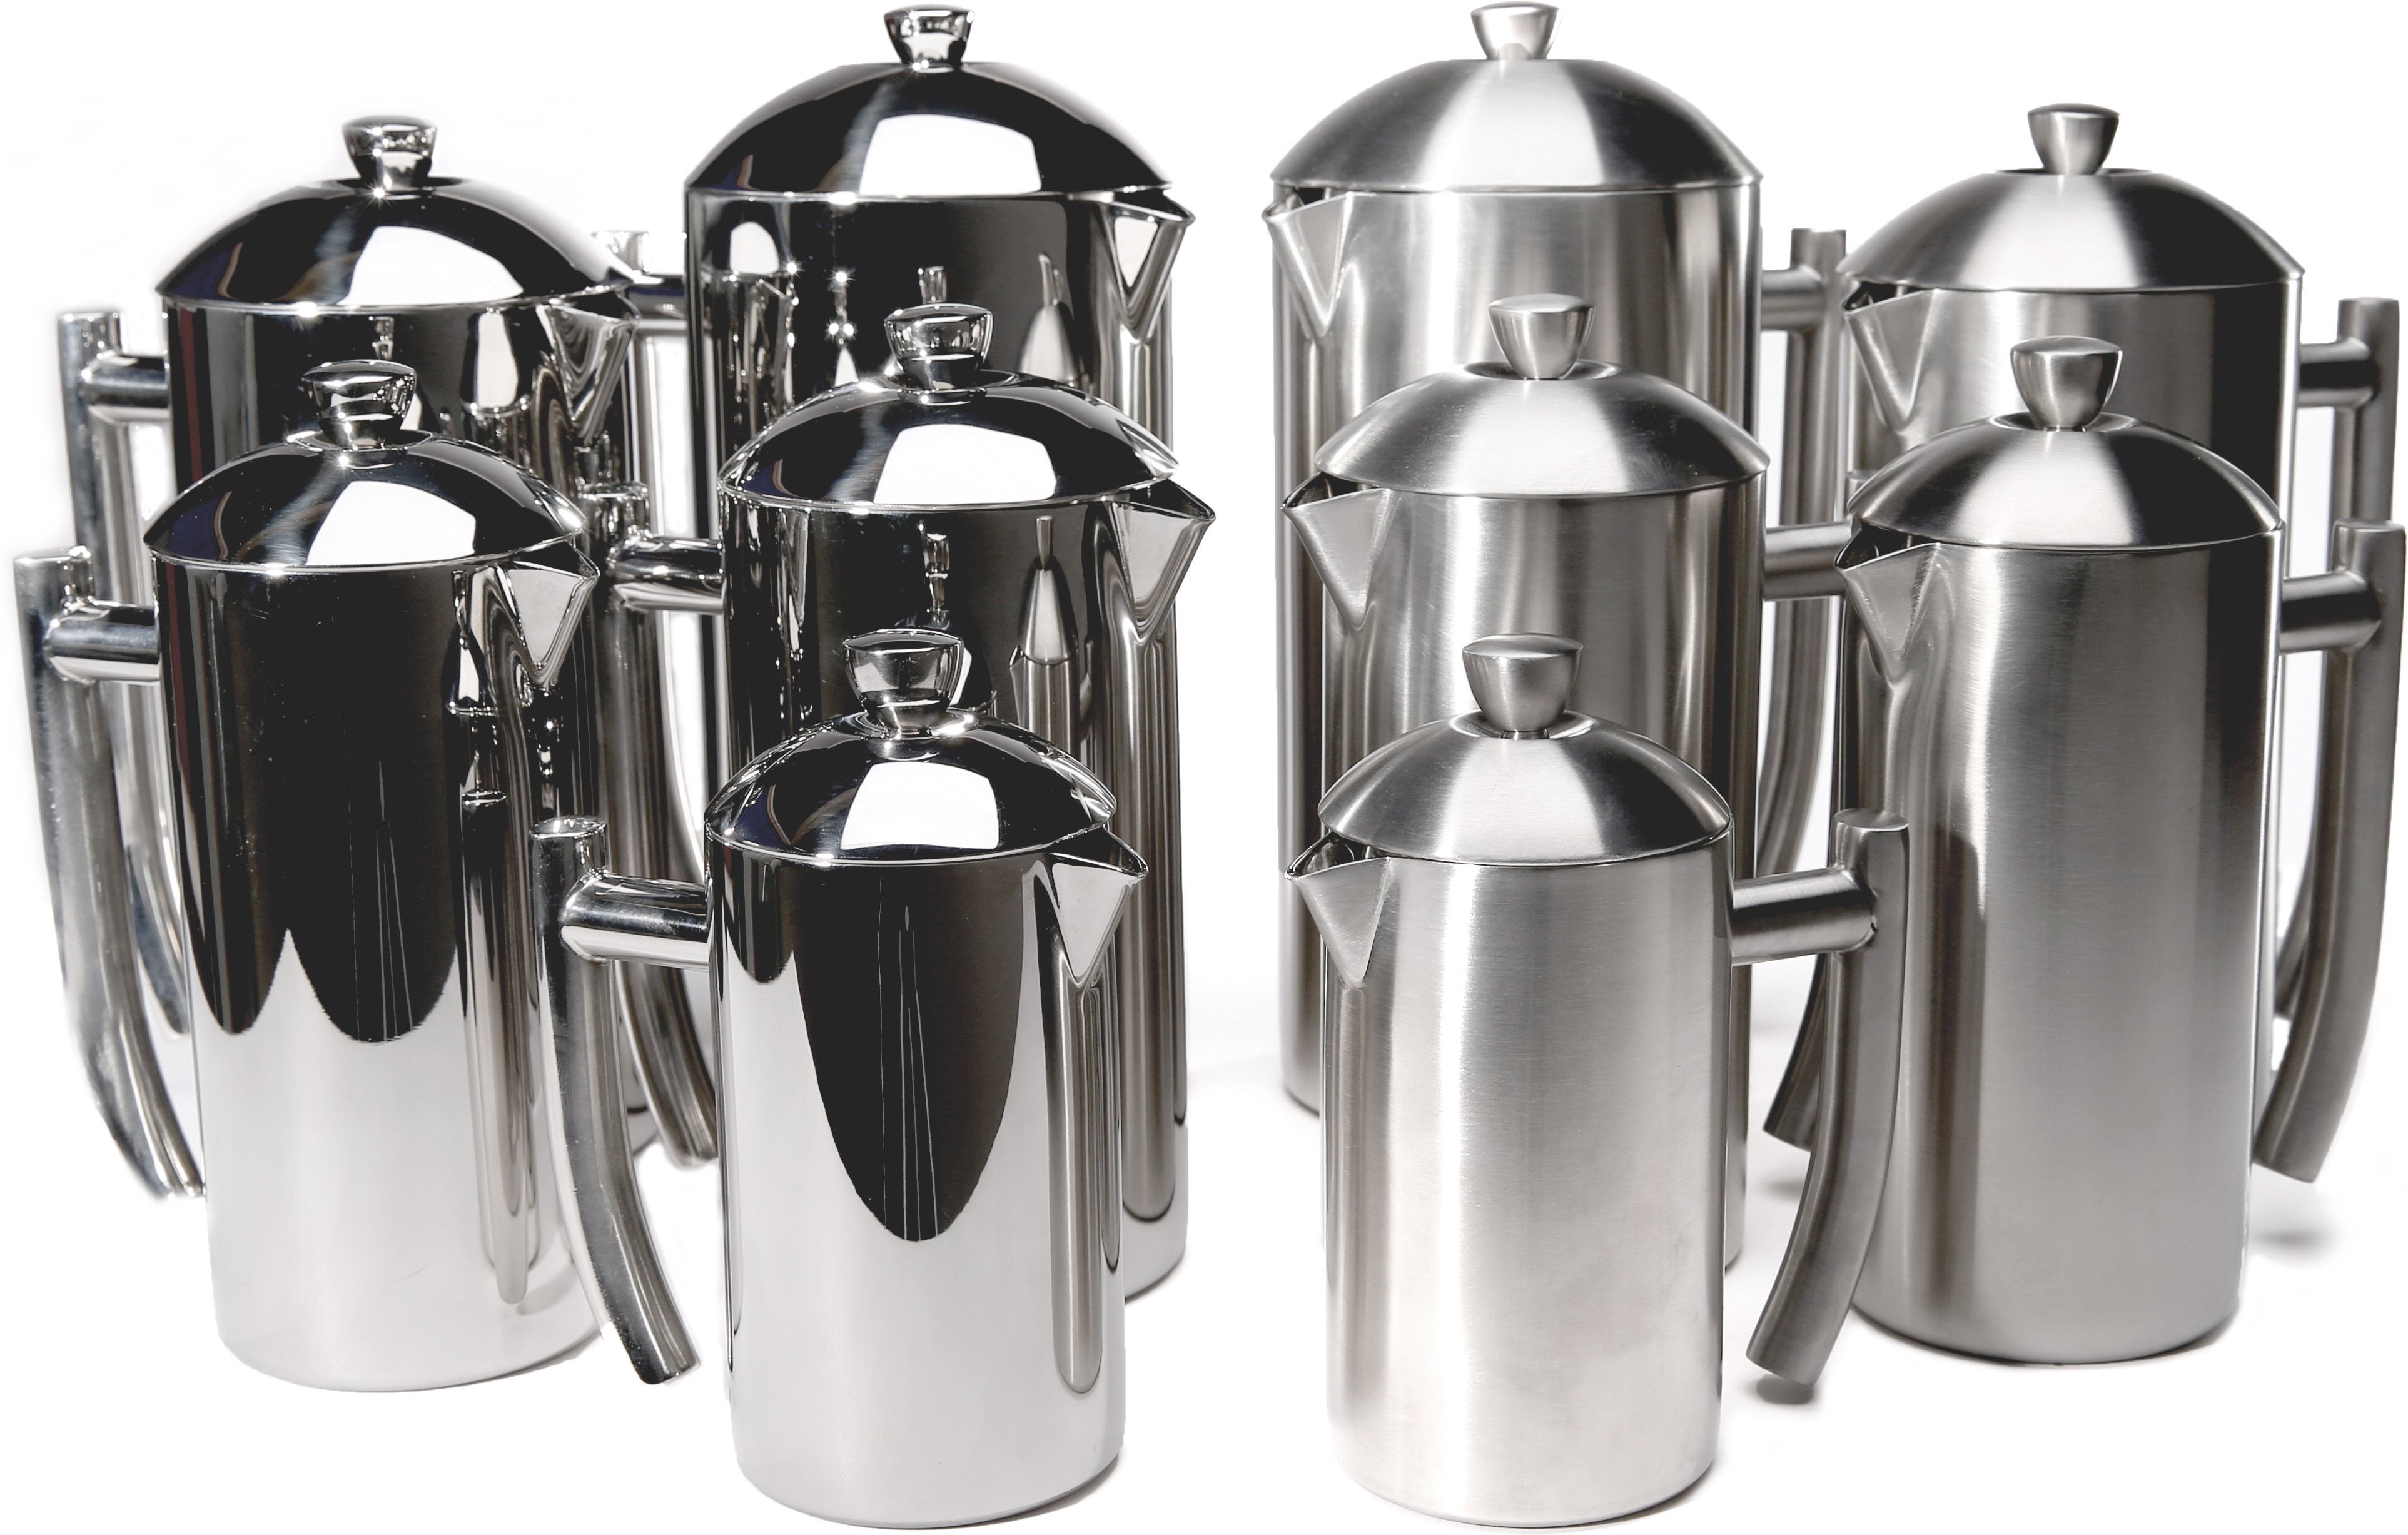 French Press Coffee Maker Double Wall Stainless Steel 1L – We Fill